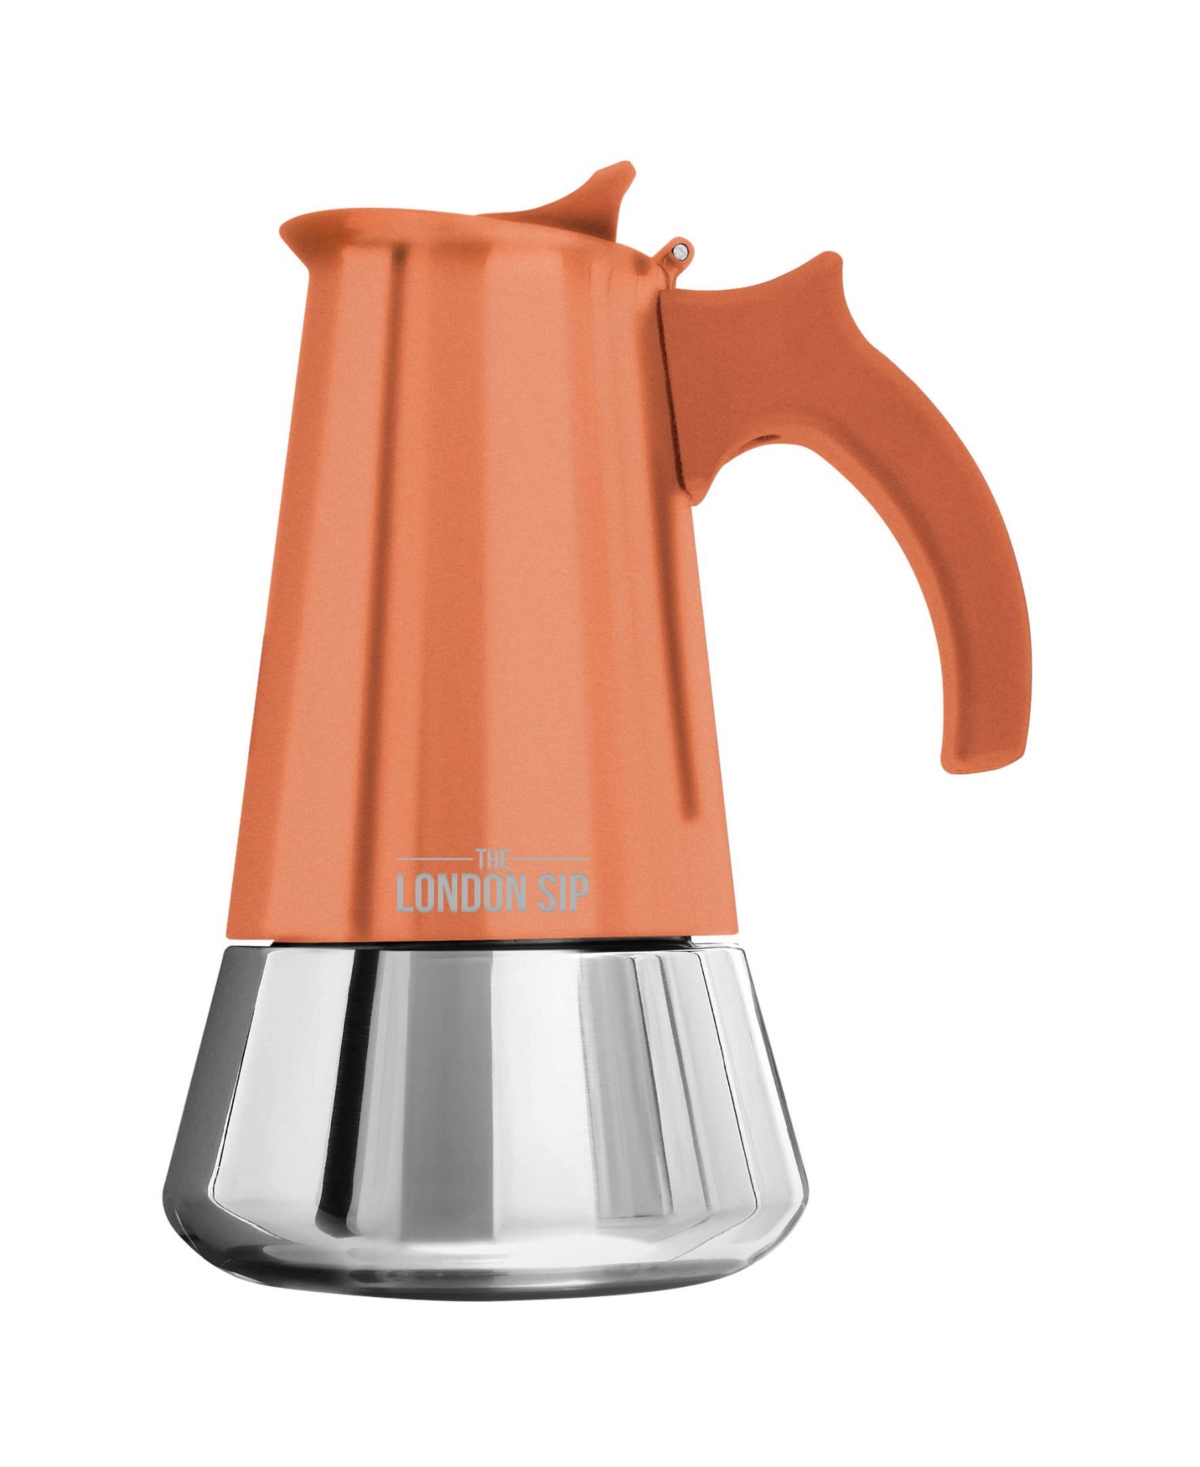 London Sip Stainless Steel Coffee Maker 10-cup In Copper